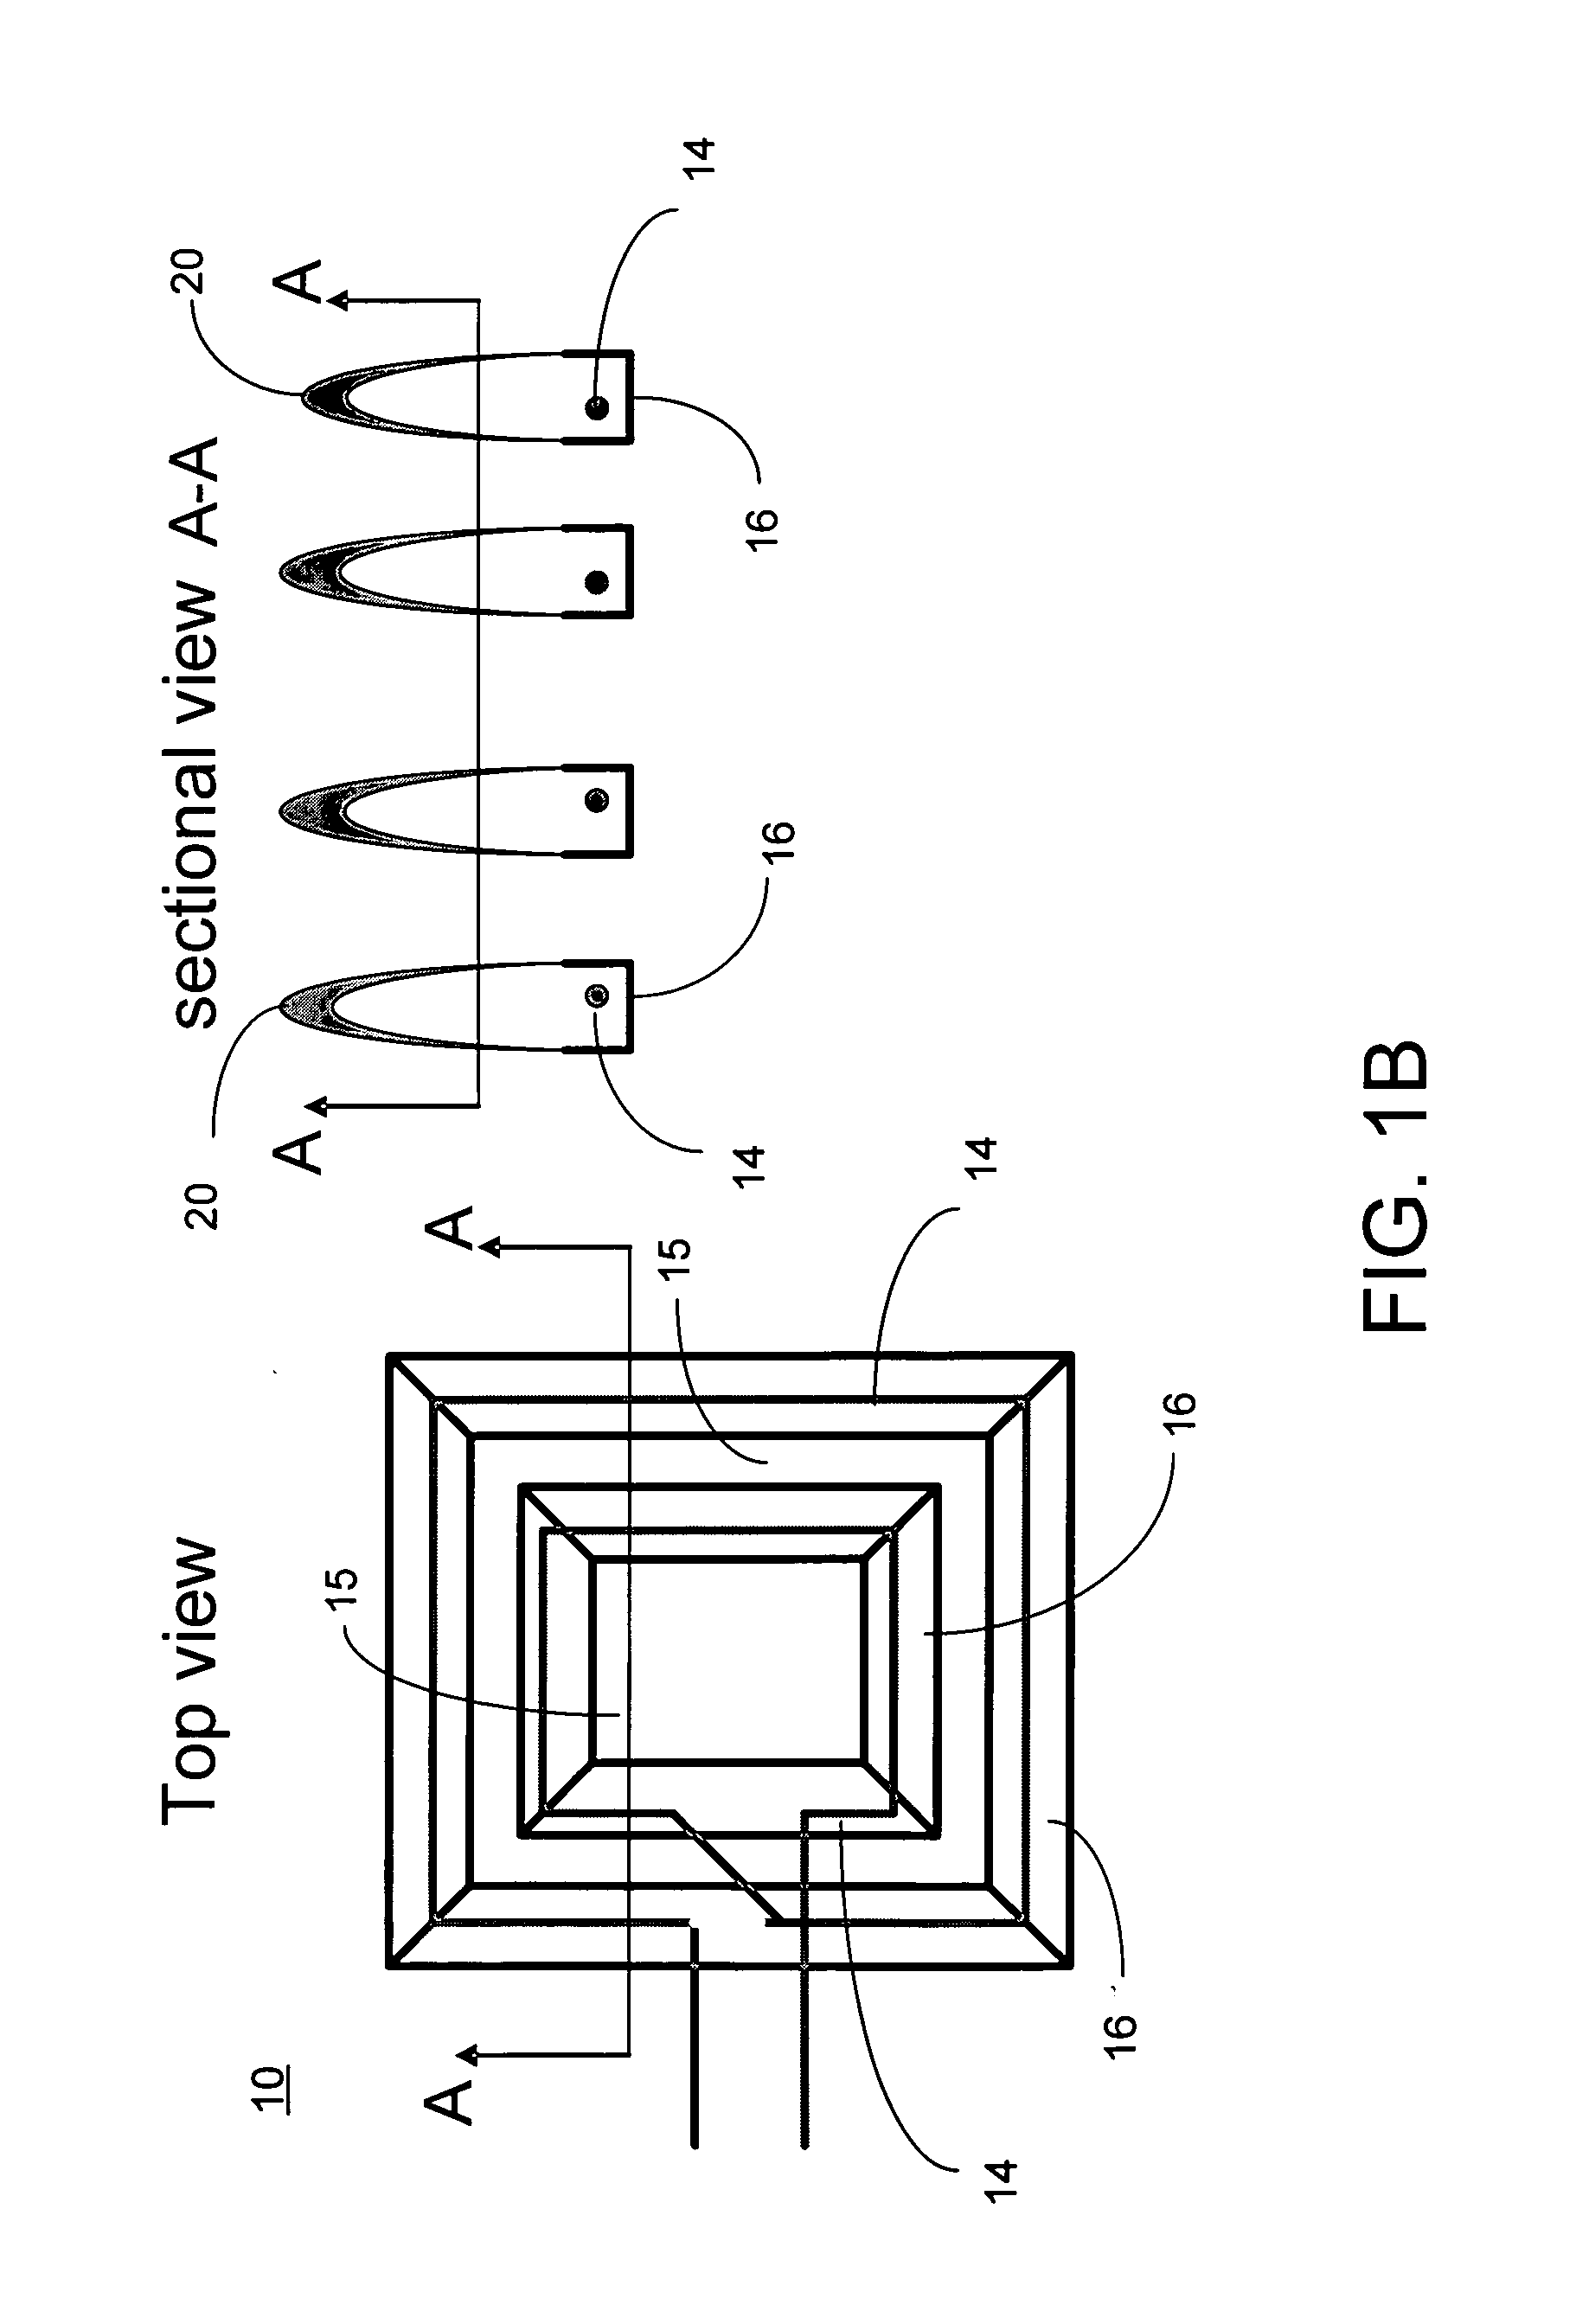 Systems and methods for communications through materials